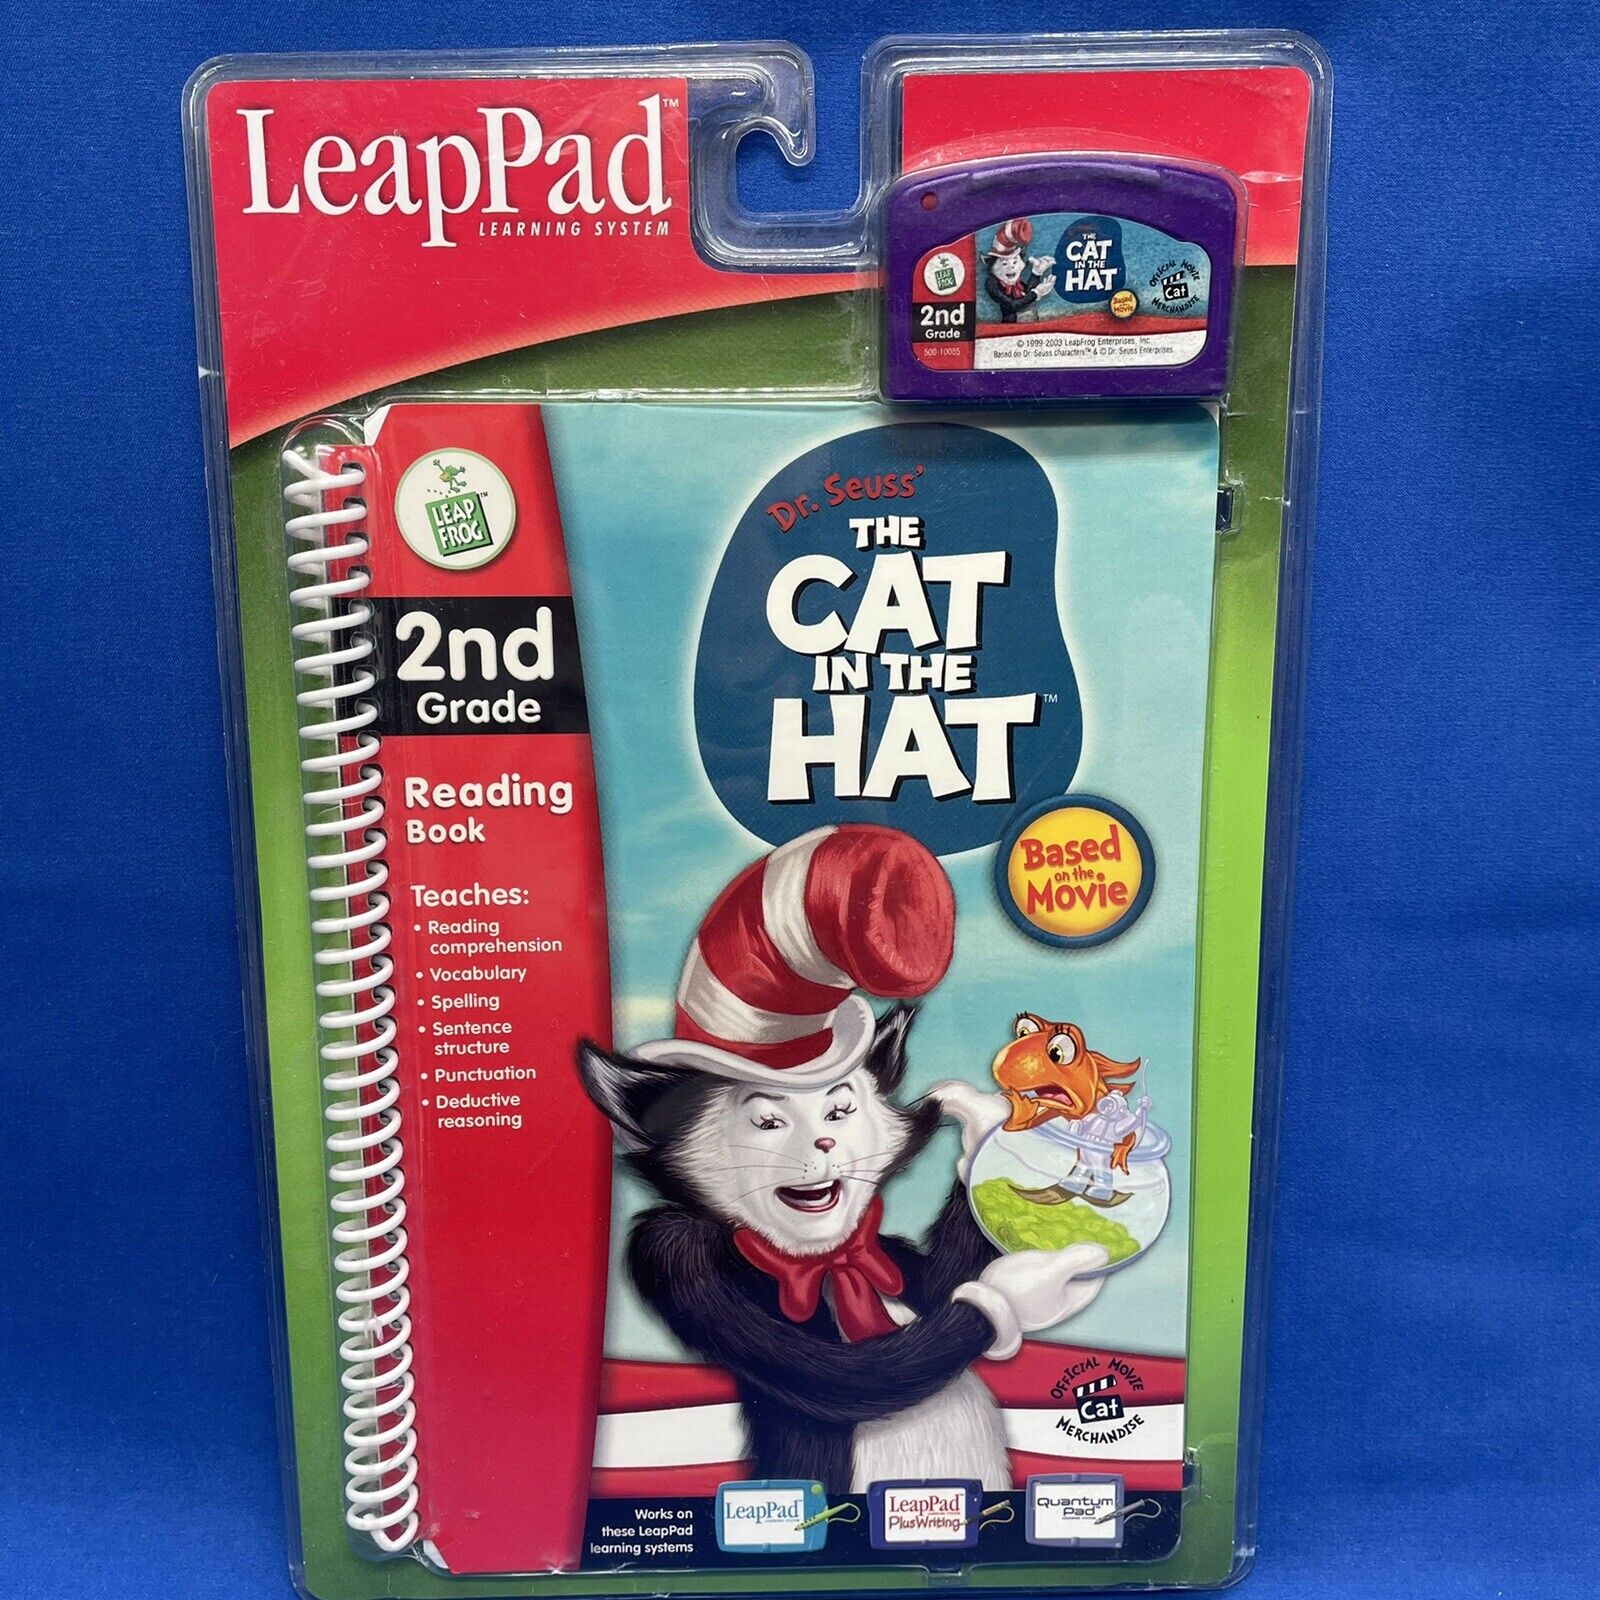 NEW LeapFrog 2nd Grade Dr. Seuss The Cat in the Hat Sealed Book And Cartridge